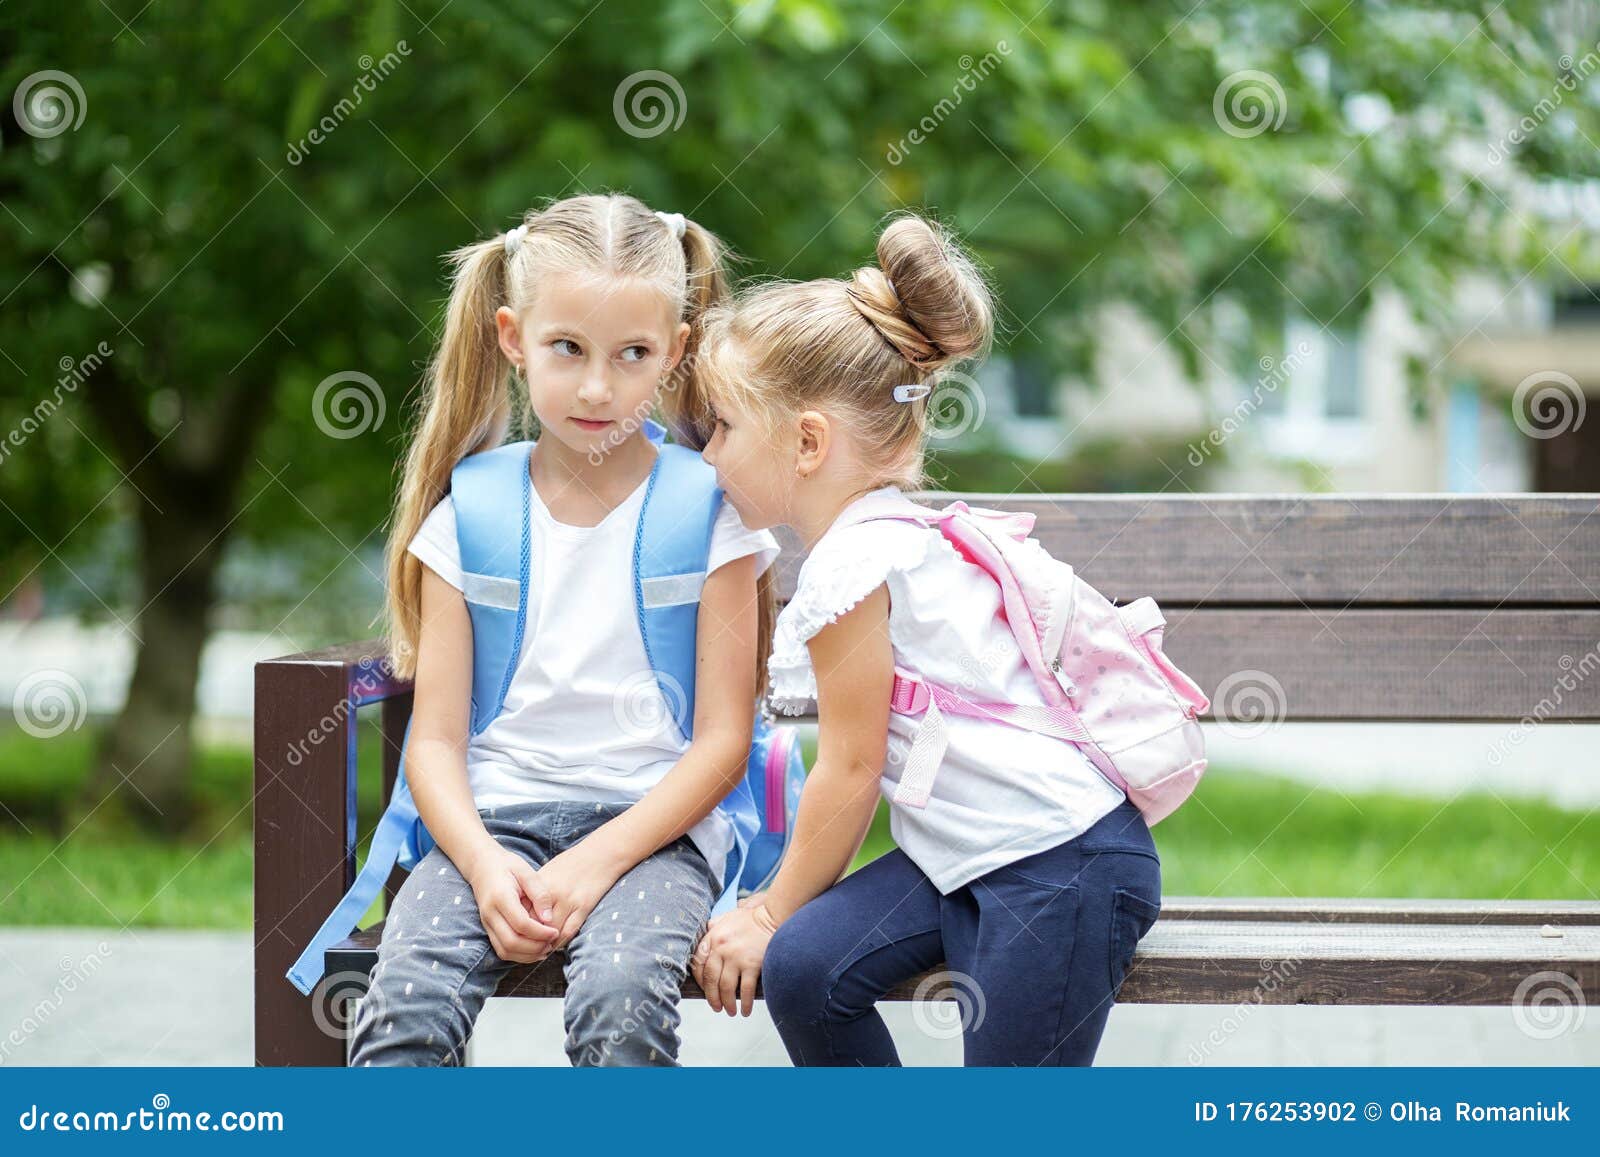 Two Small Children Gossip On A Bench. The Concept Is Back